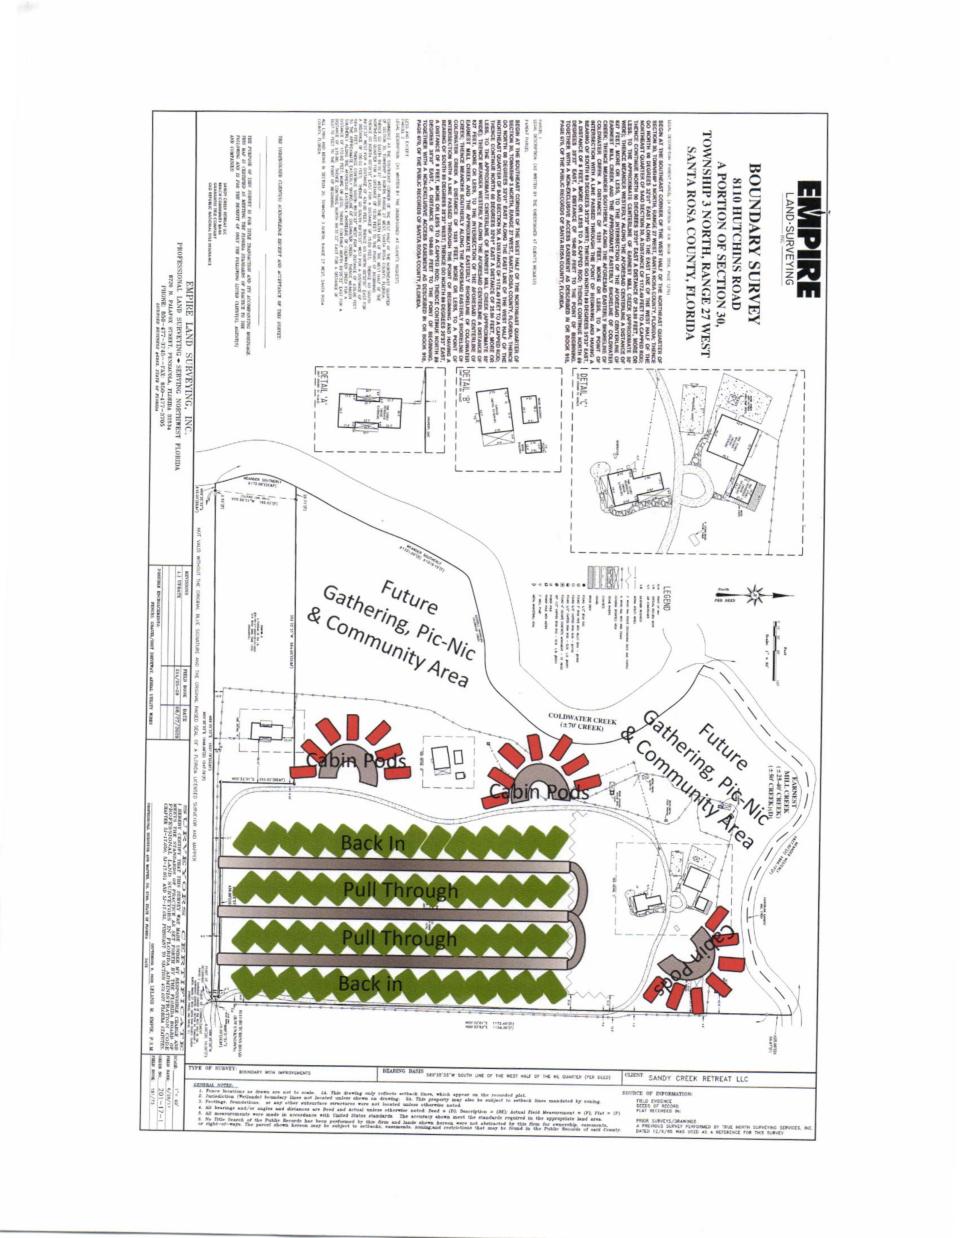 Initial plans for an RV resort in Milton off Hutchins Road are pictured.